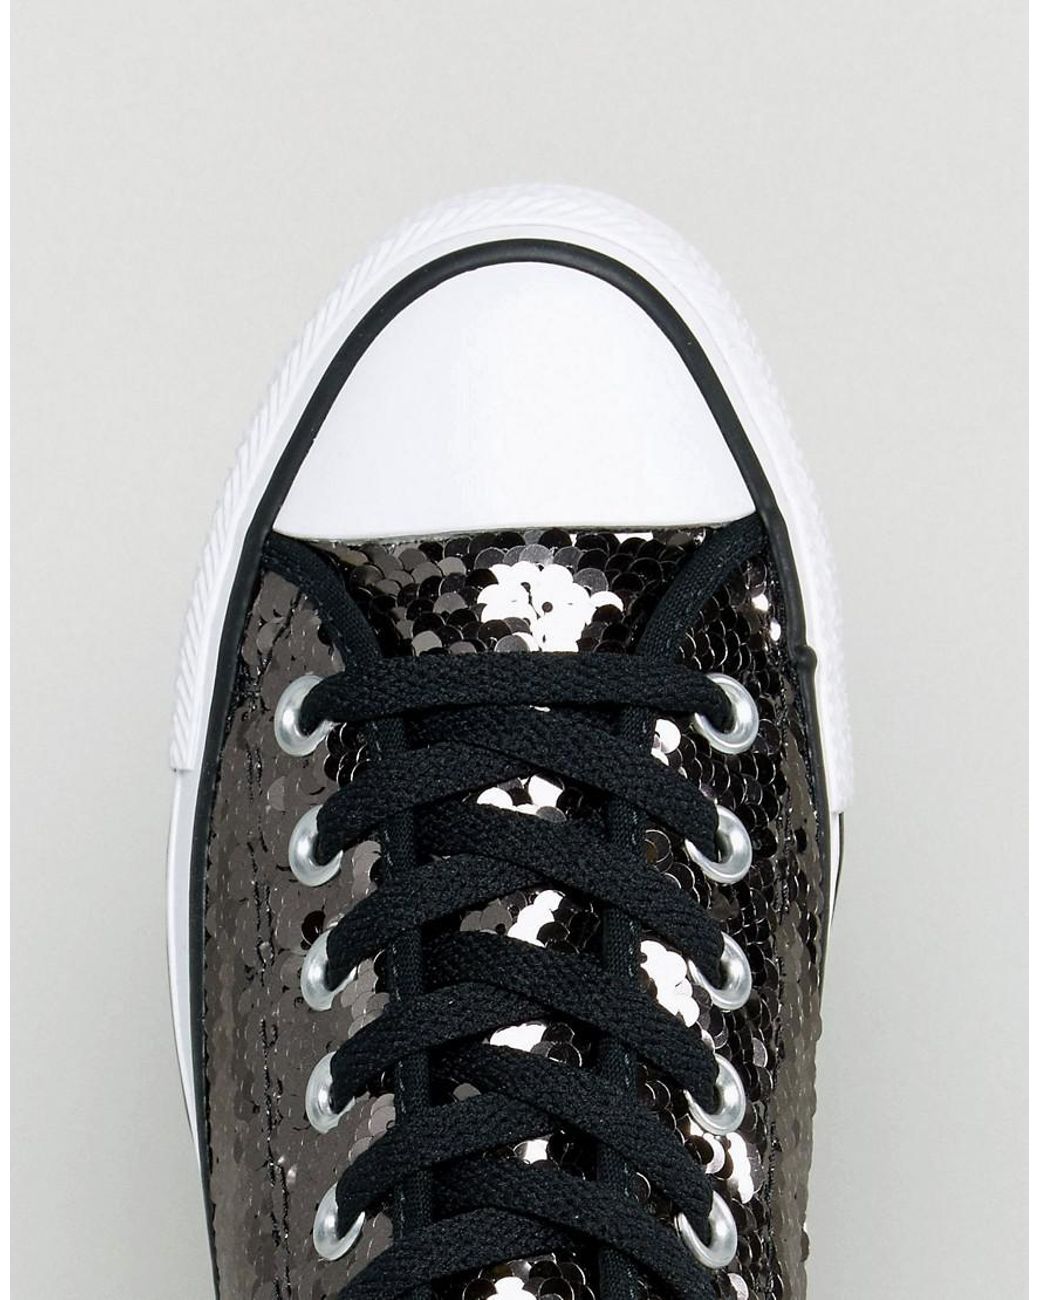 Kong Lear fornuft Prelude Converse Chuck Taylor High Sneakers In Black Sequin | Lyst